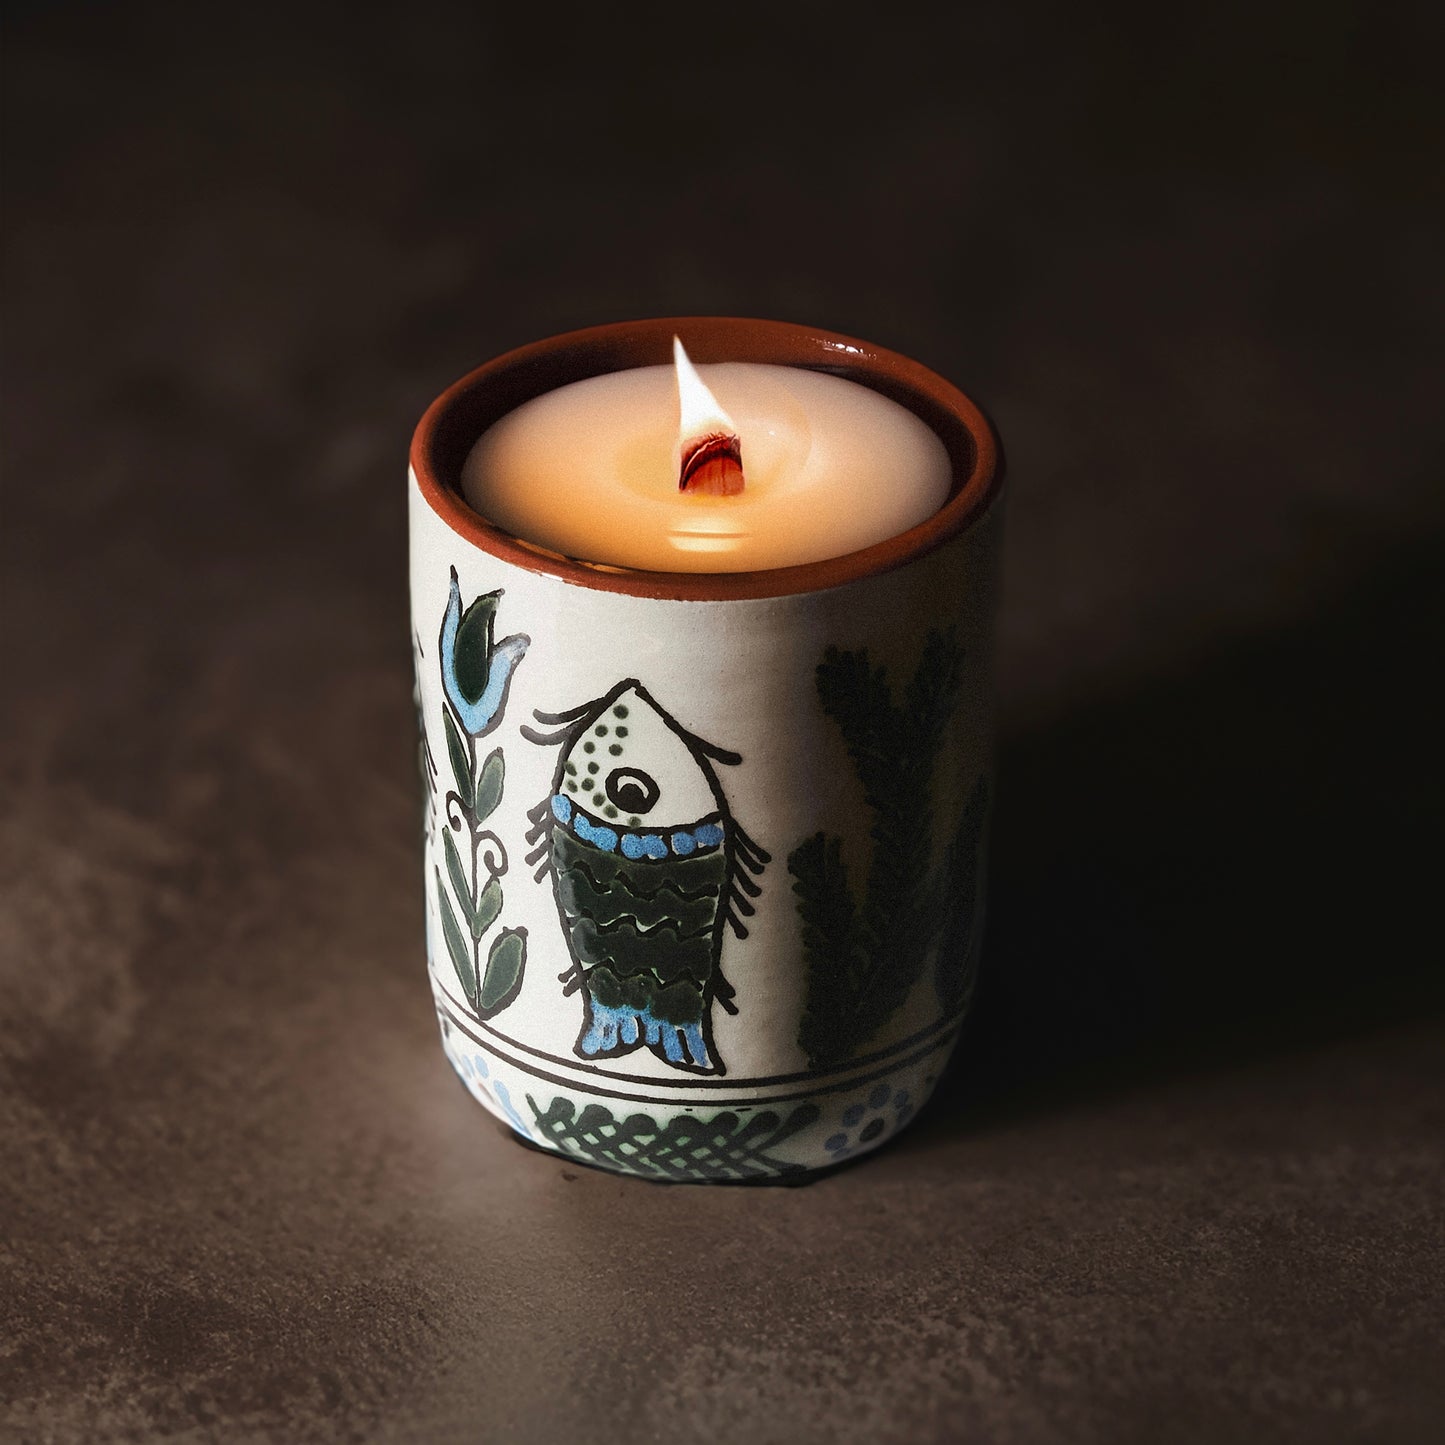 Olive Candle "RYBKY" 240ml